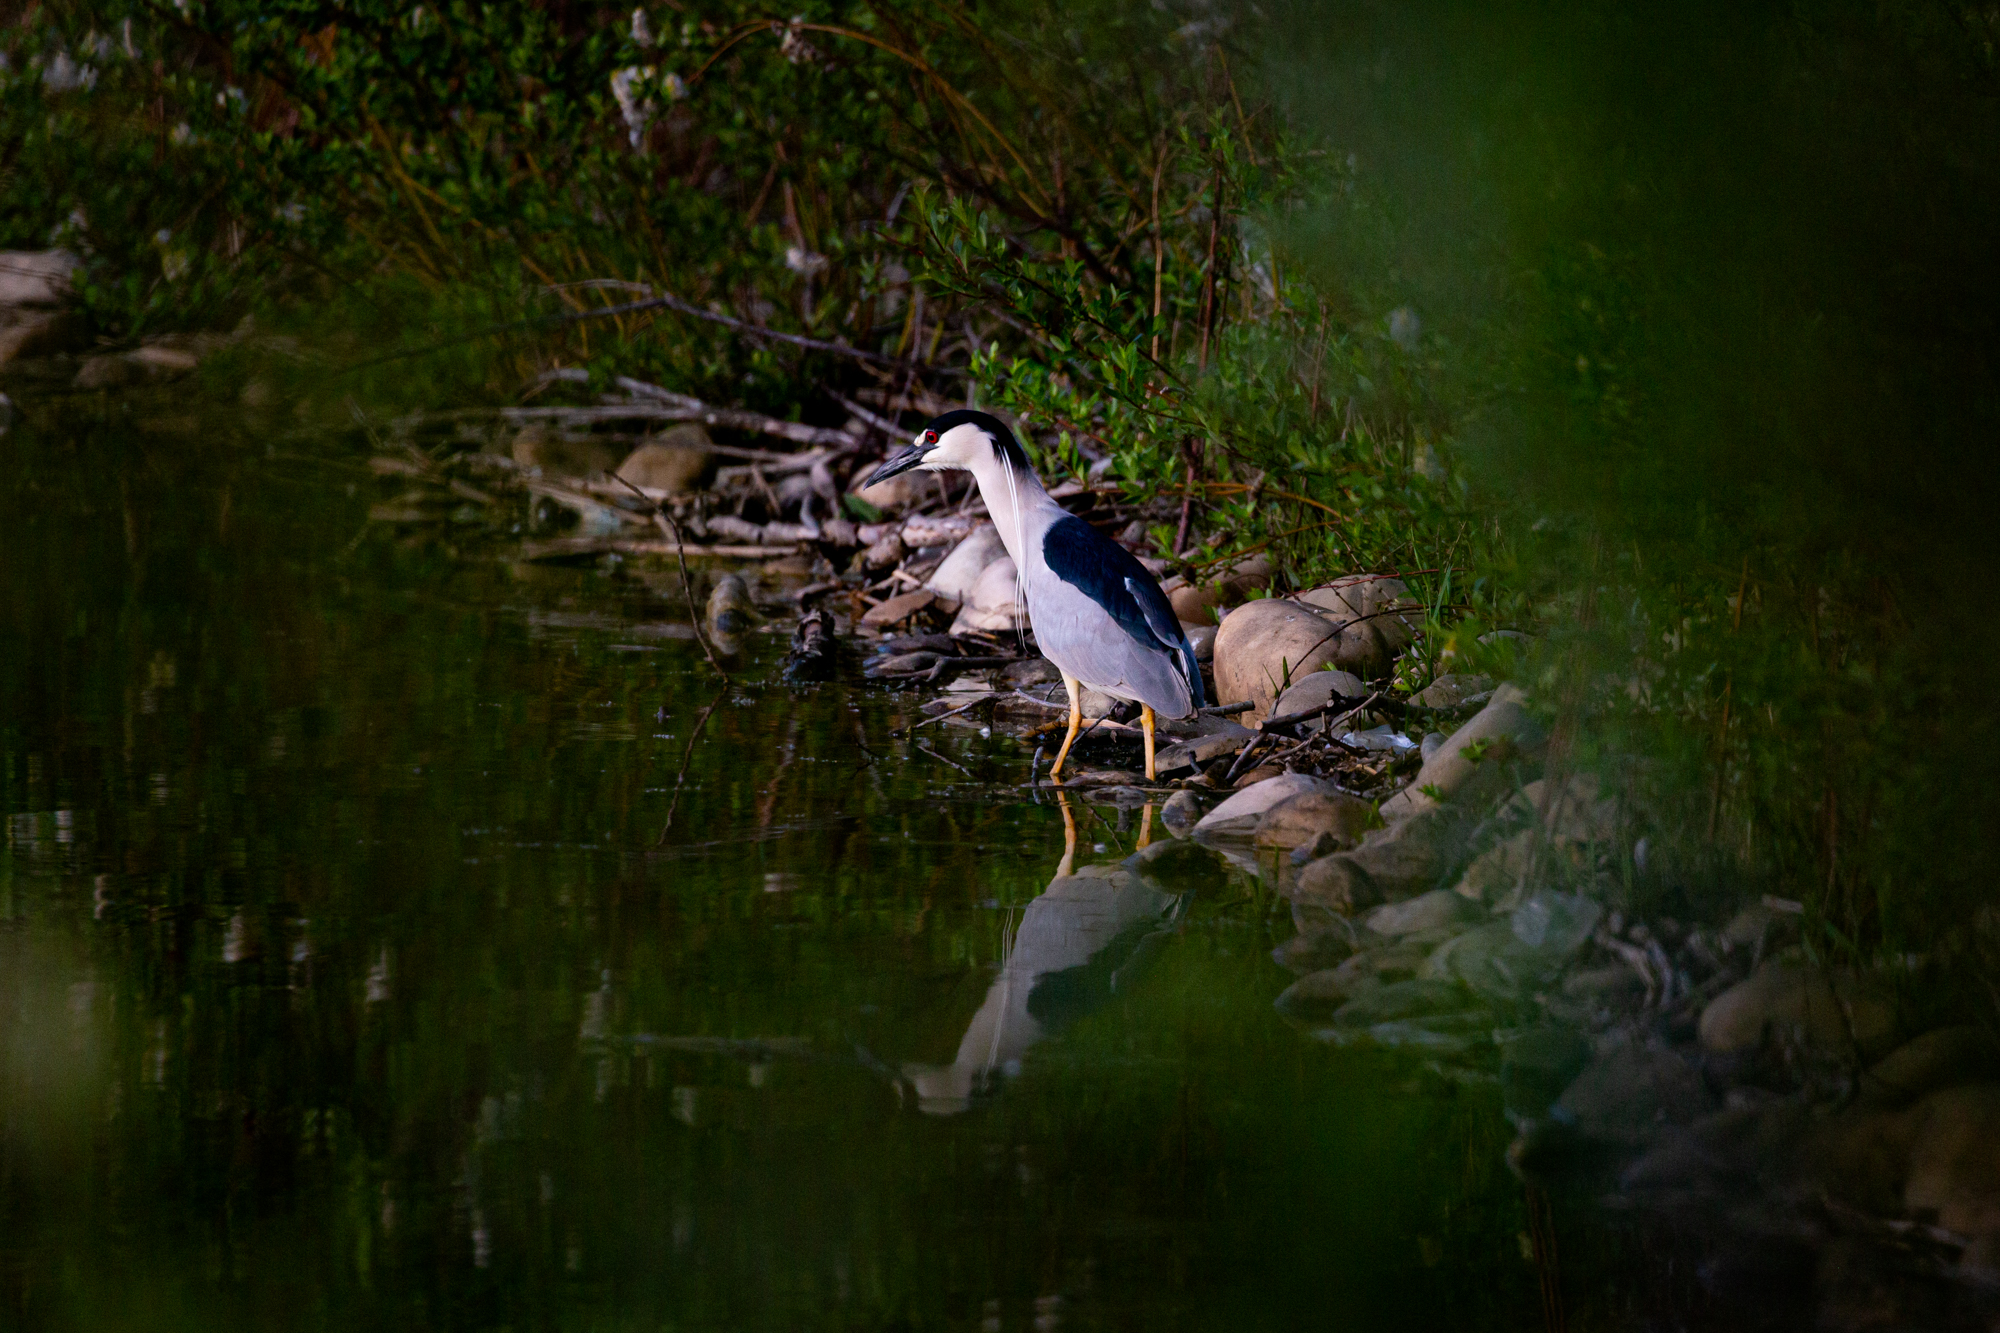 Photo of a Black-Crowned night heron standing in the water along a rocky shore. The water is calm and you can see their reflection. Green foliage is present among the willows trees and image is shot through leaves so there is a bit of green saturation over the bottom left, and top right to give the appearance of peeking through the leaves.